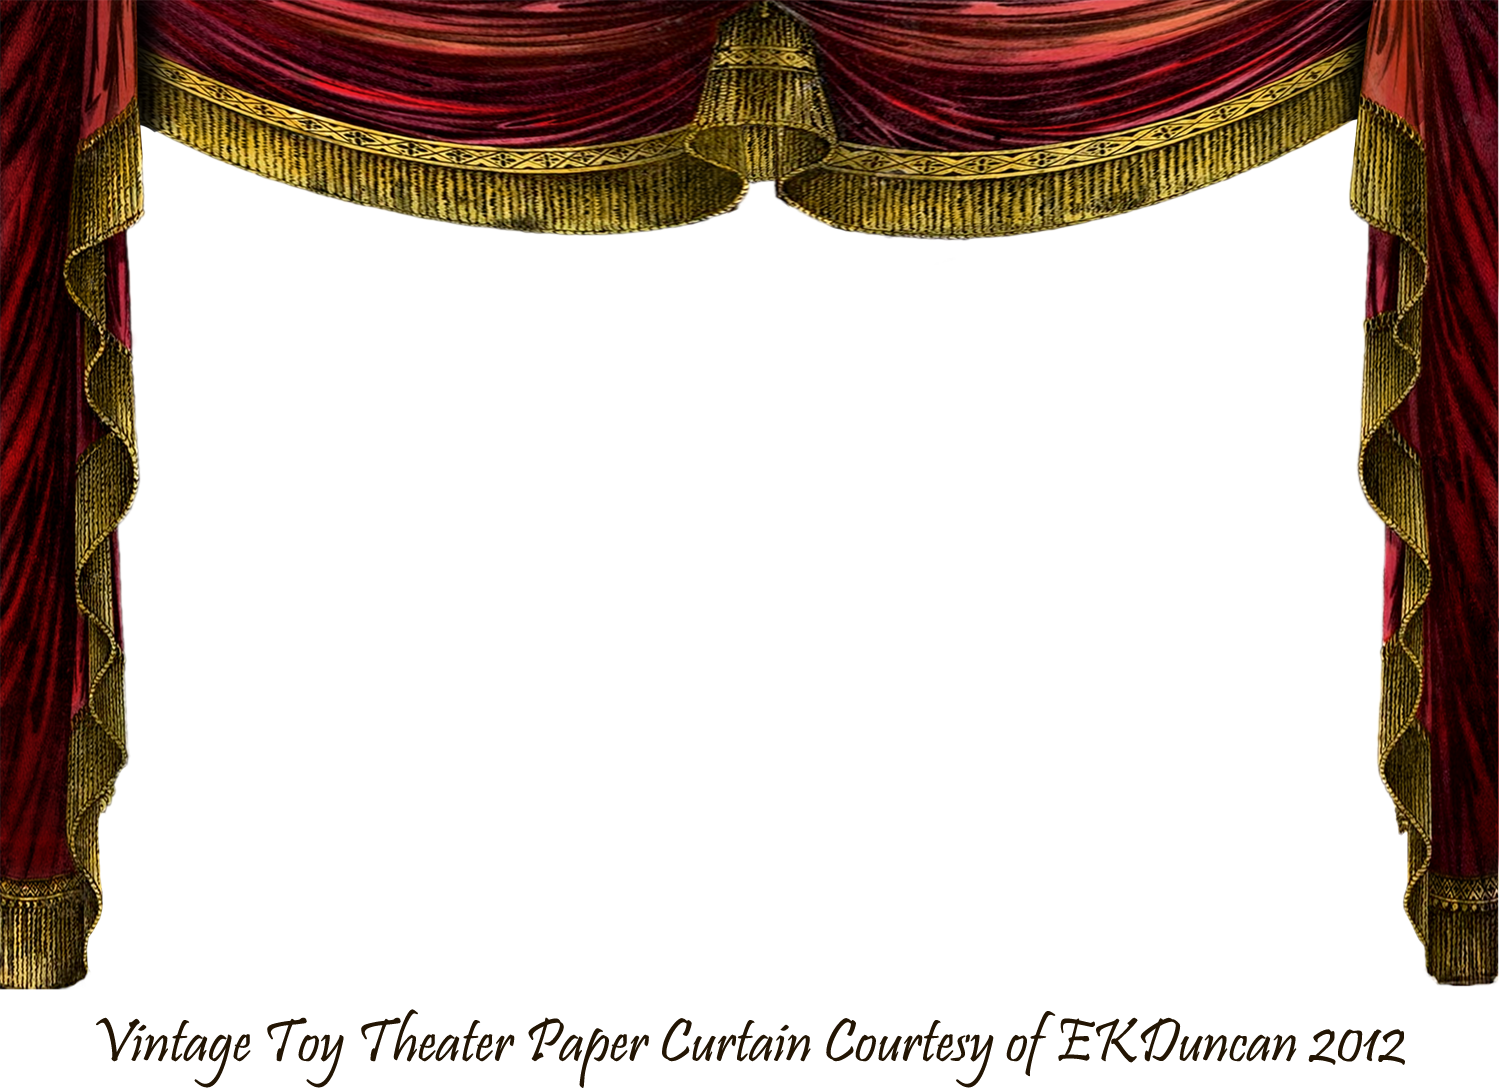 curtains clipart golden stage